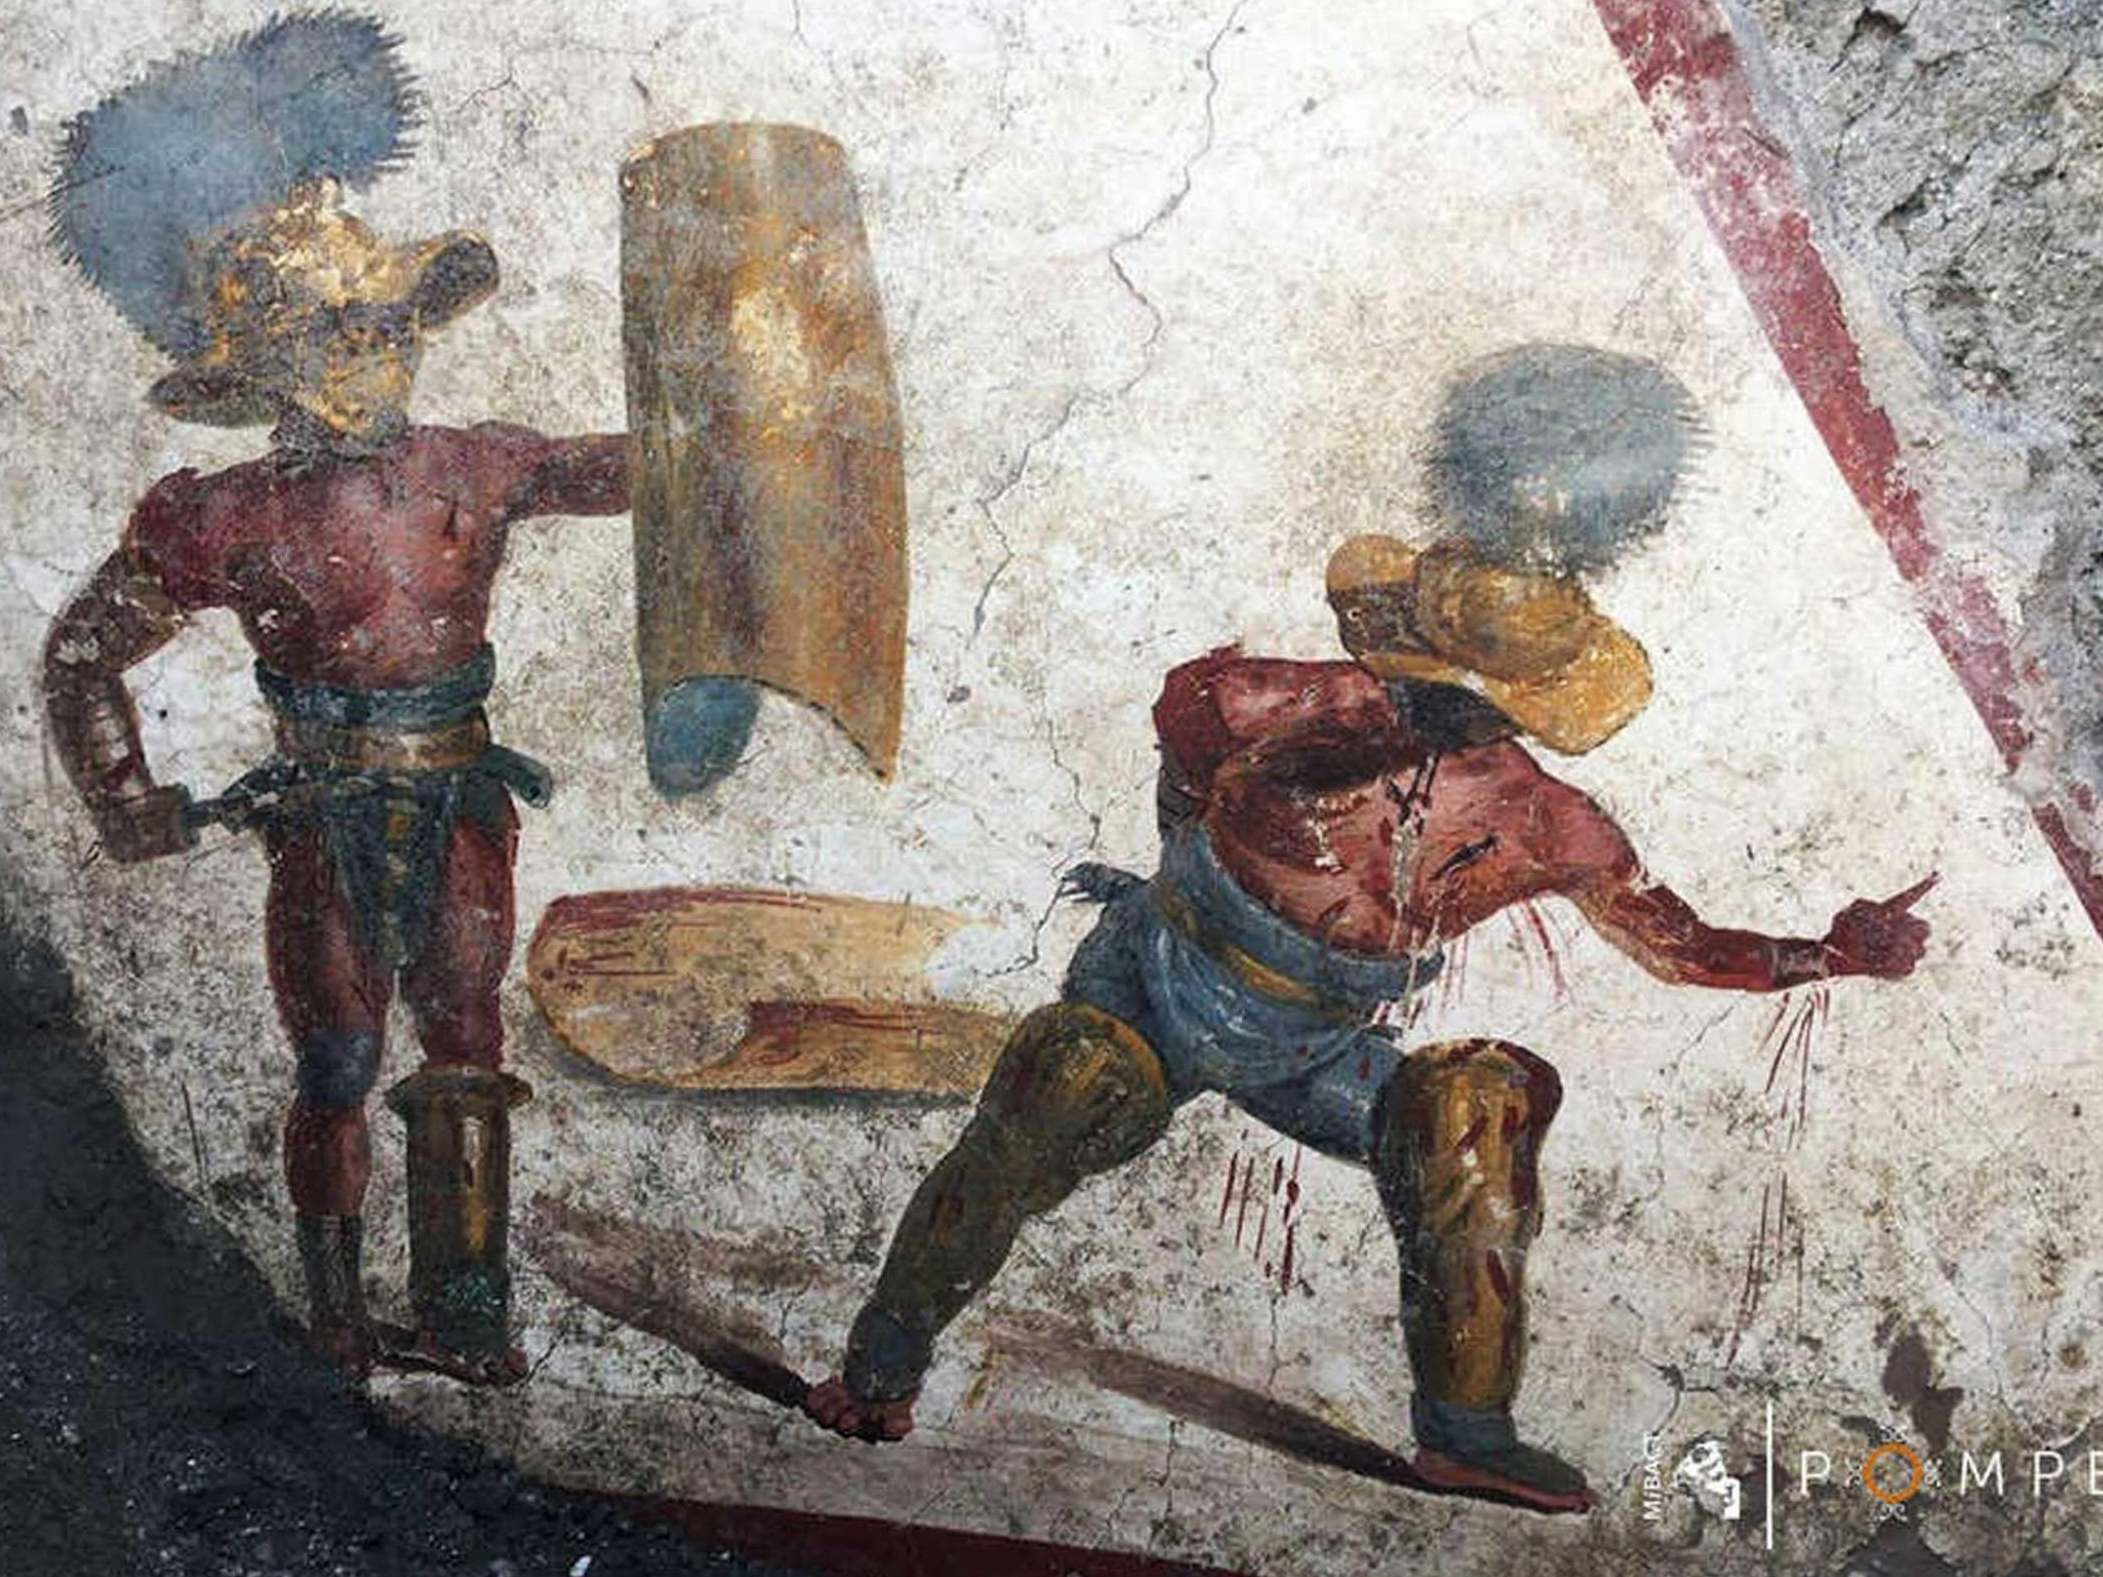 The wall painting is the latest in a string of discoveries to fascinate archaeologists